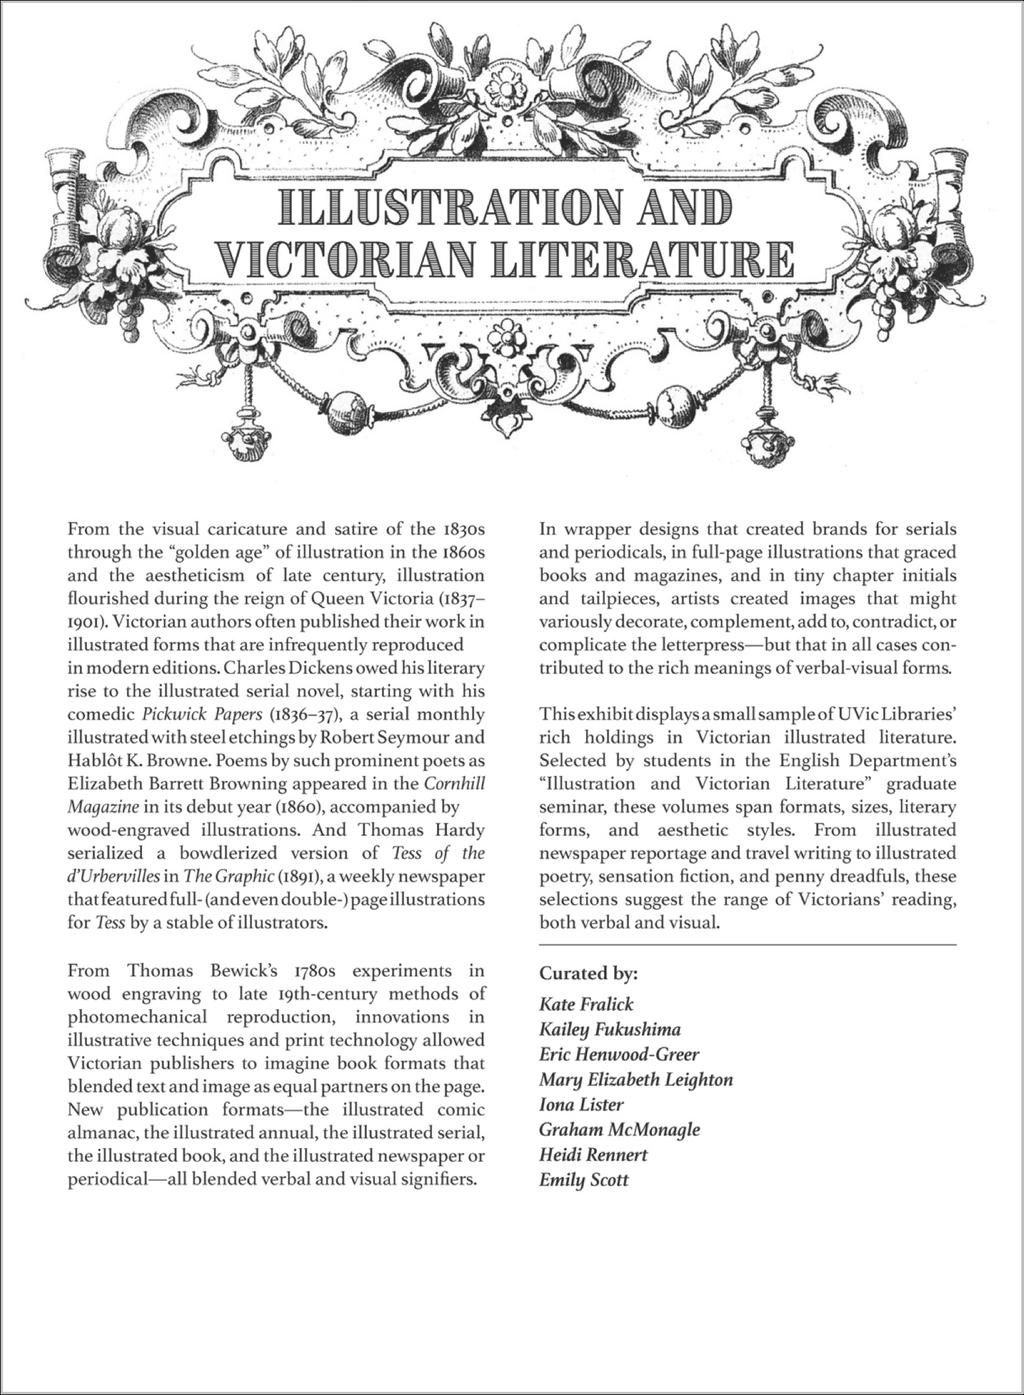 Figure 2: Illustration and Victorian Literature exhibition poster written by Dr.